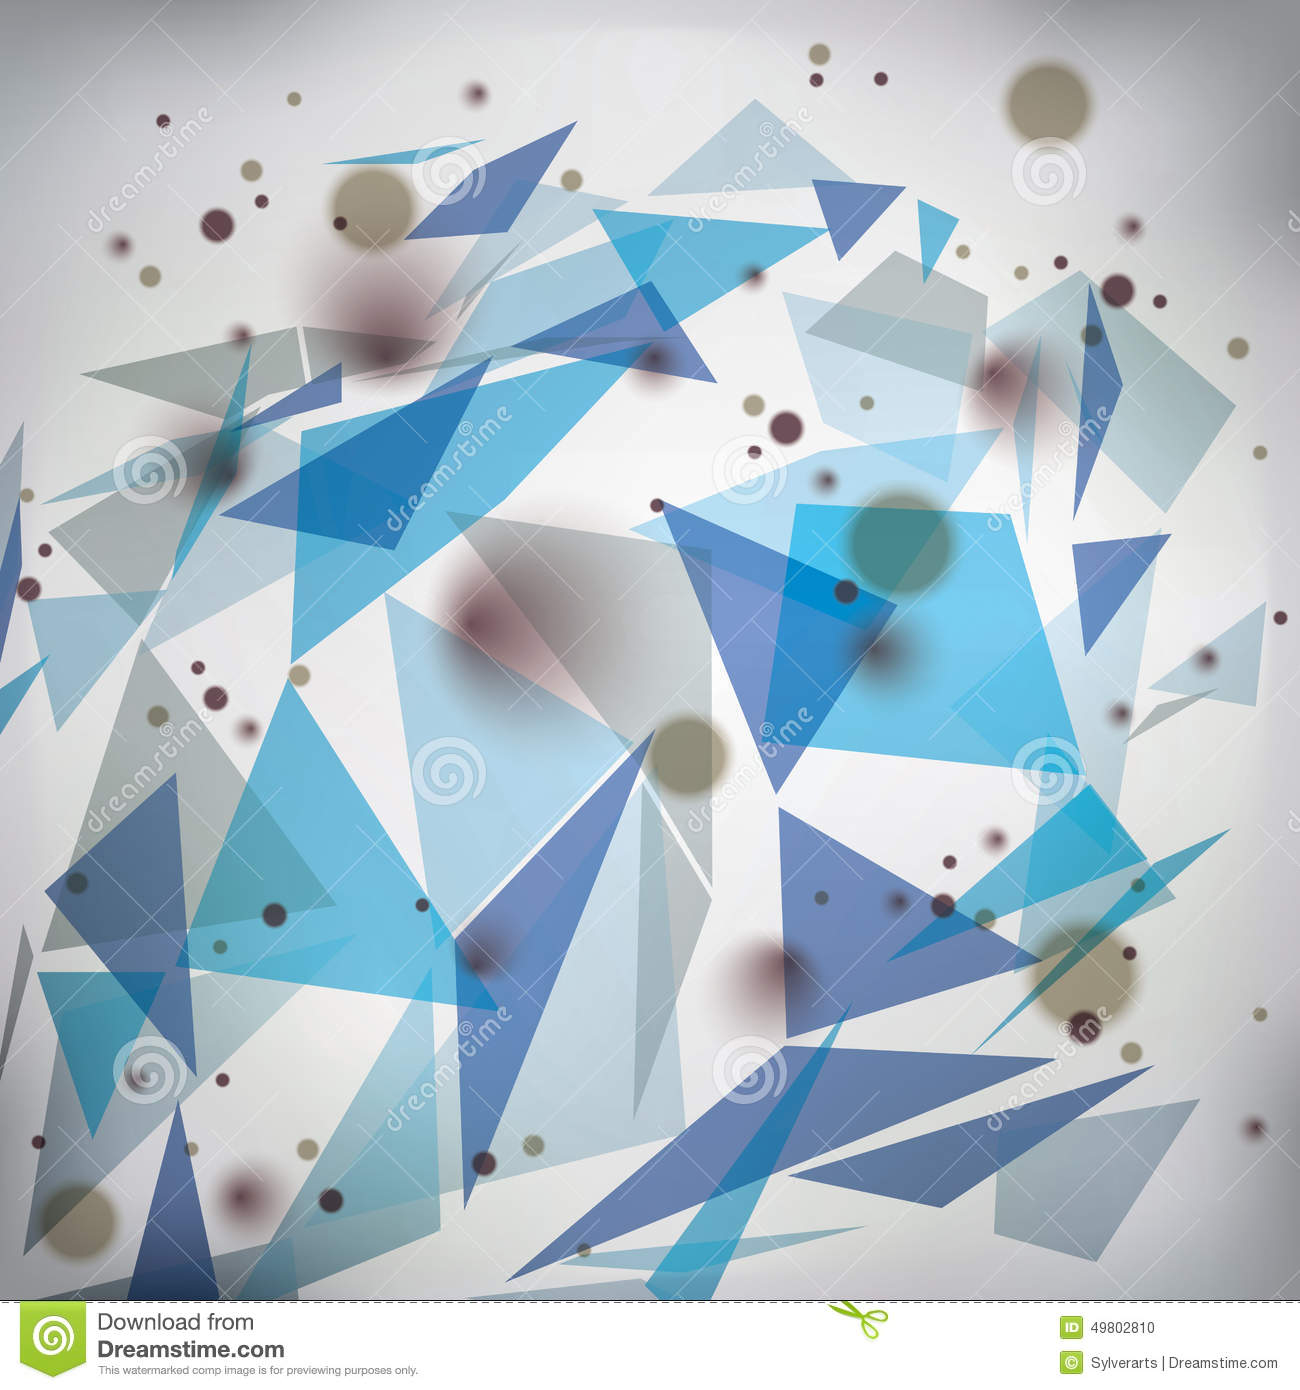 Abstract Geometric Graphic Design